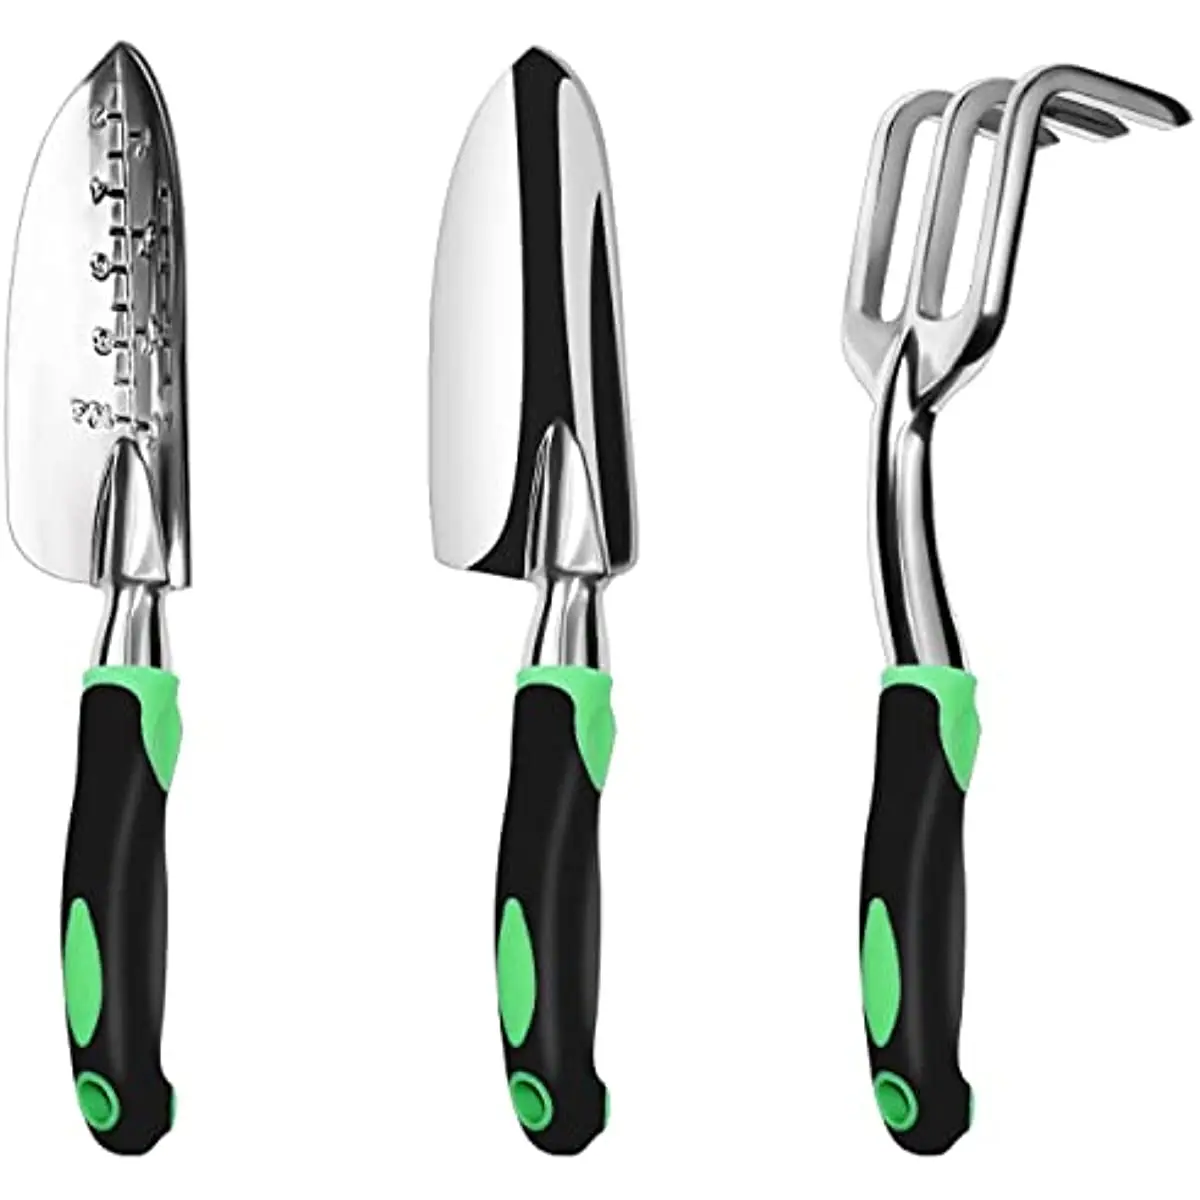 3 Pack Aluminum Heavy Duty Gardening Kit Includes Hand Trowe Transplant Trowel and Cultivator Hand Rake with Soft Rubberized